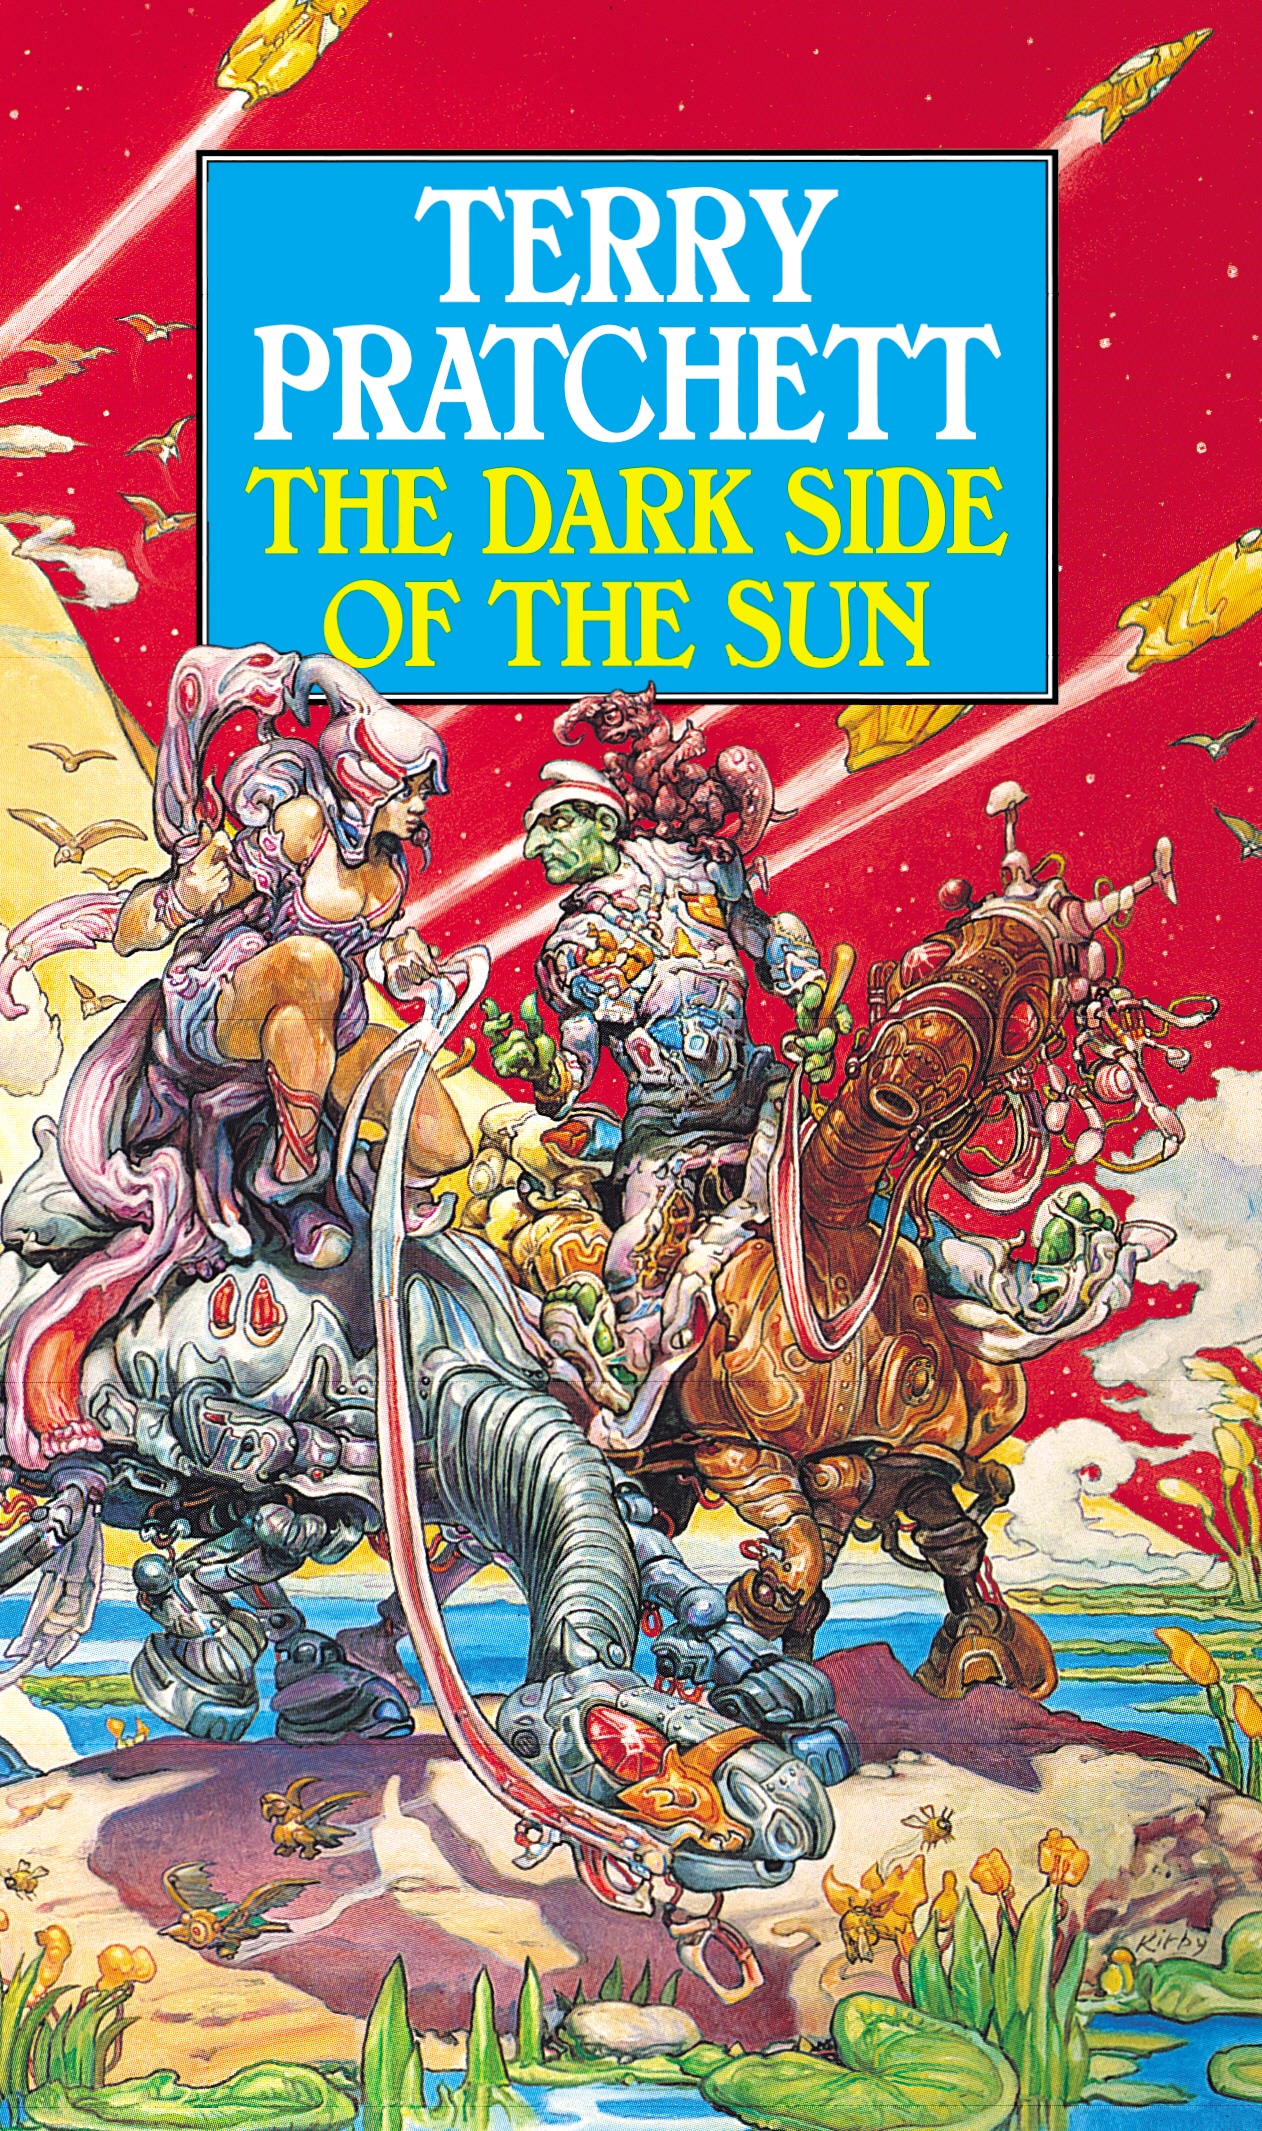 Book “The Dark Side Of The Sun” by Terry Pratchett — April 22, 1988